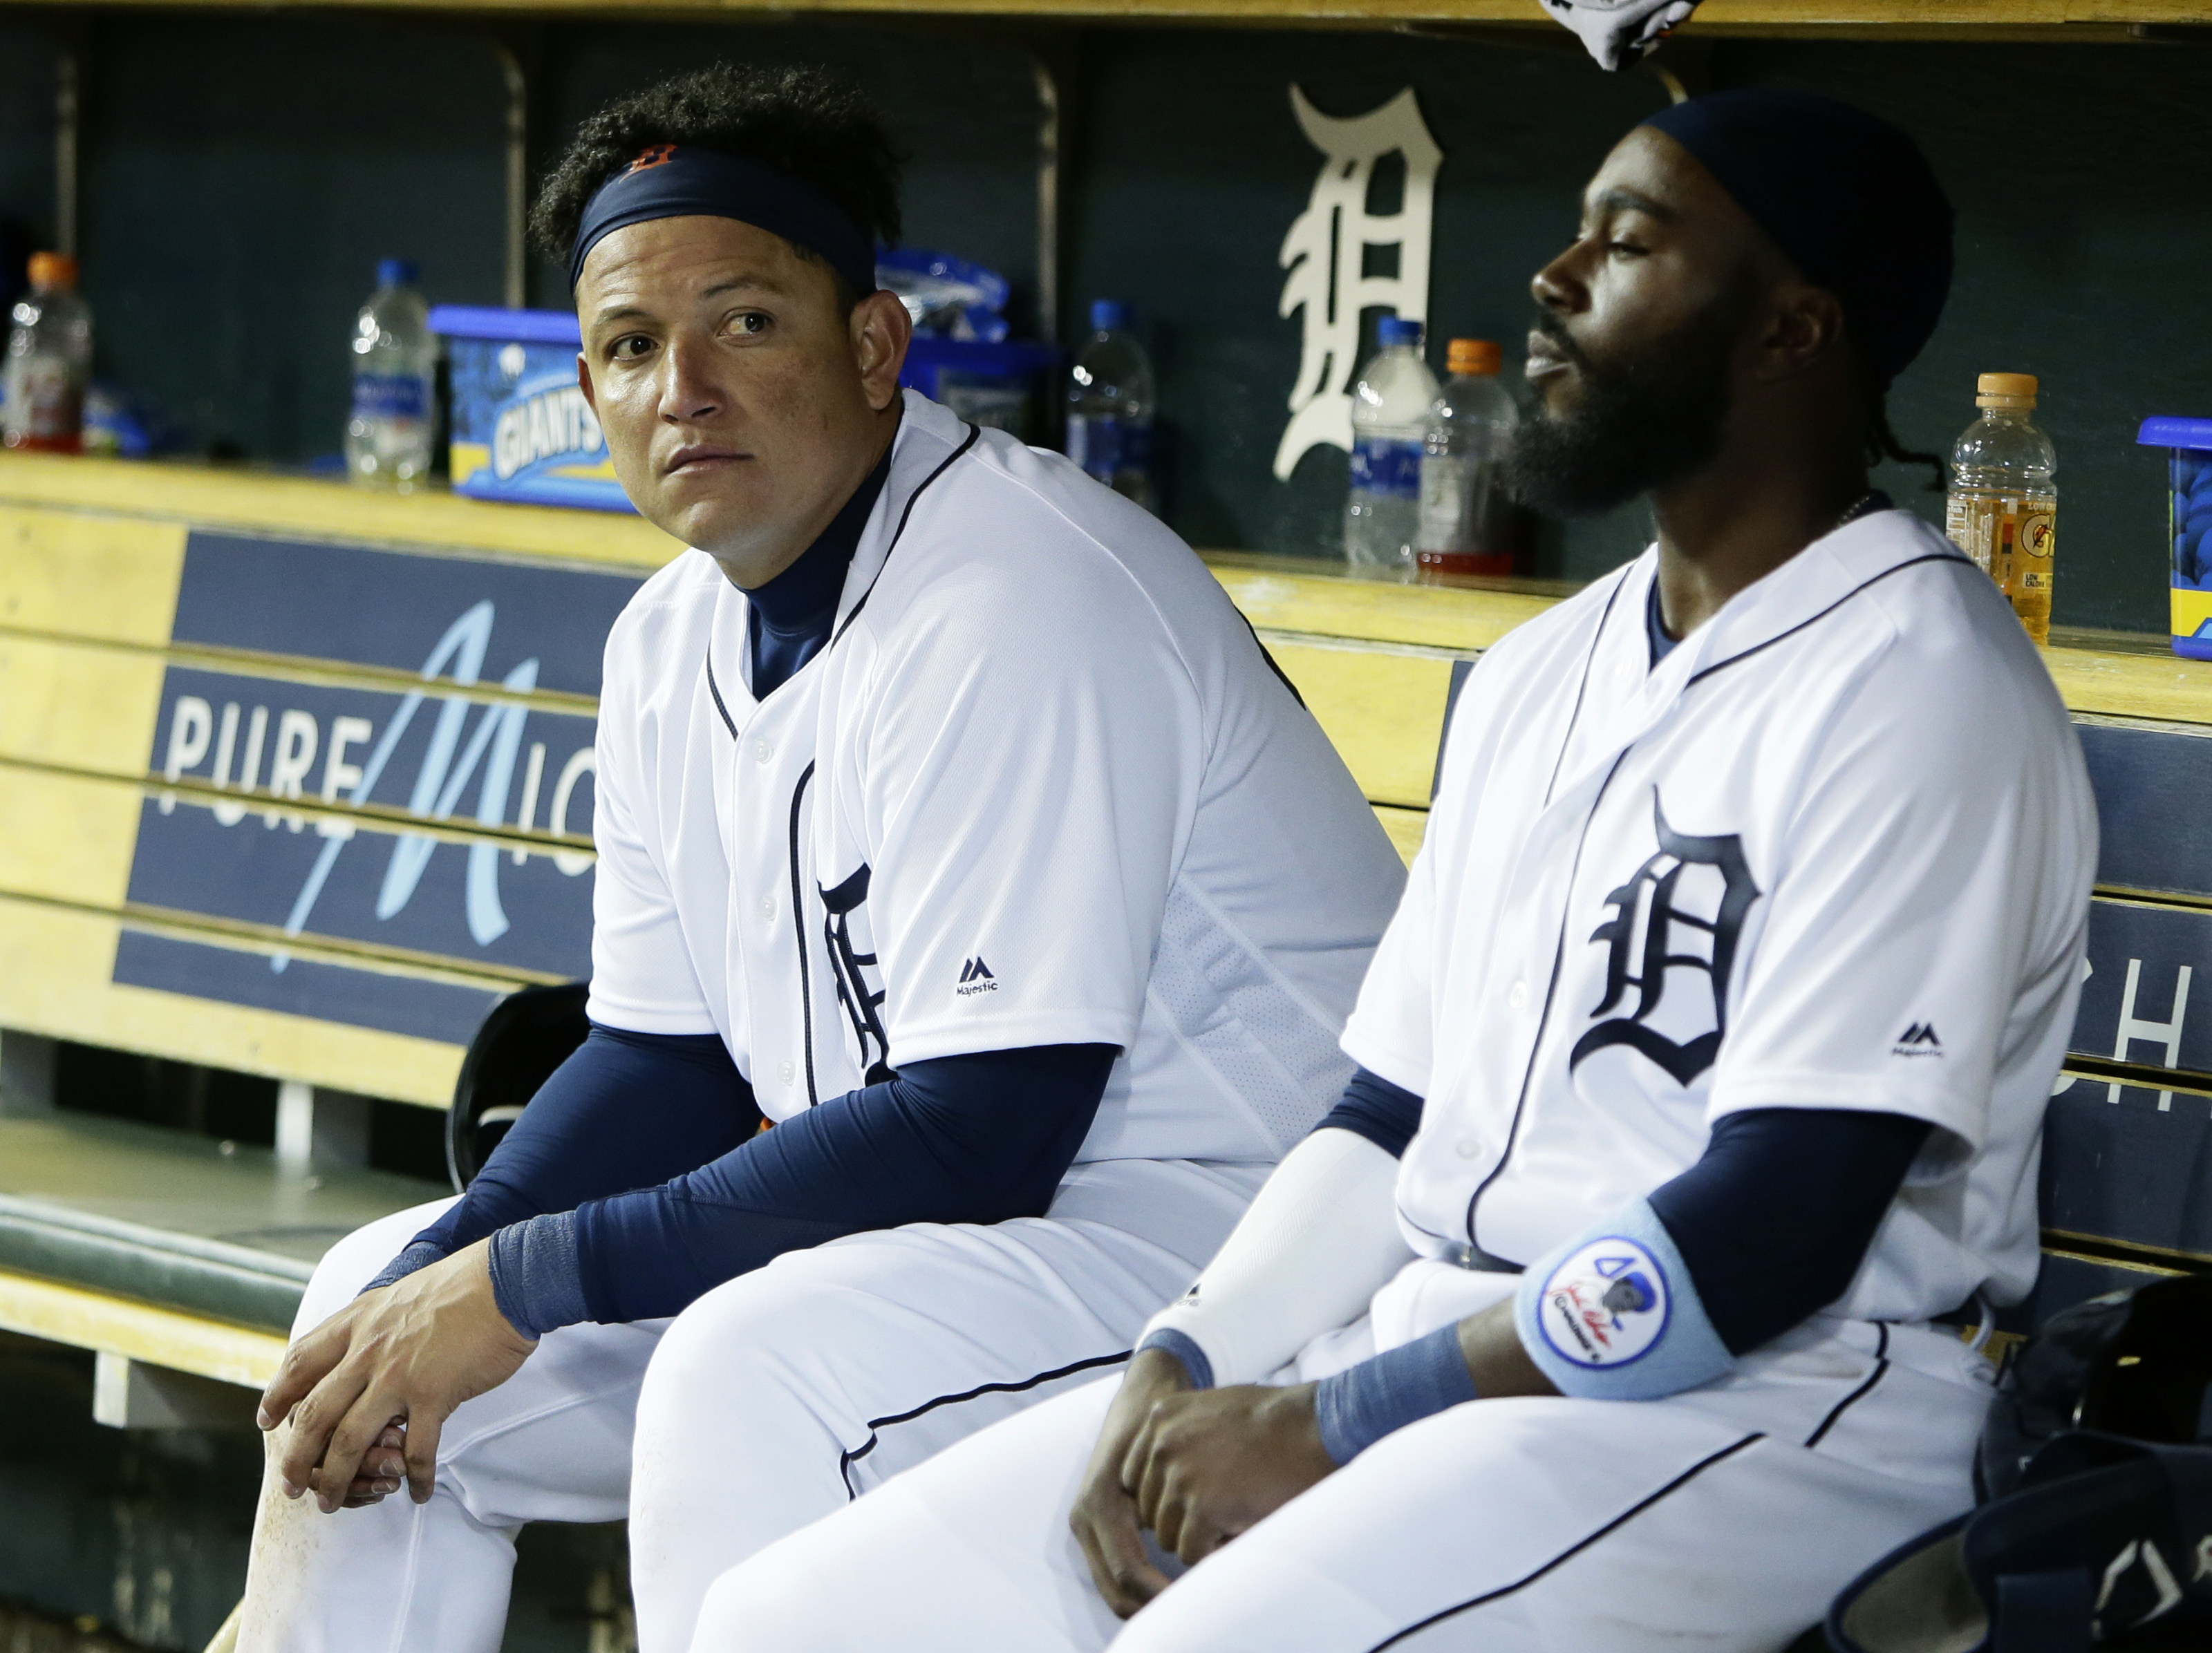 Miguel Cabrera of the Detroit Tigers watches from the dugout